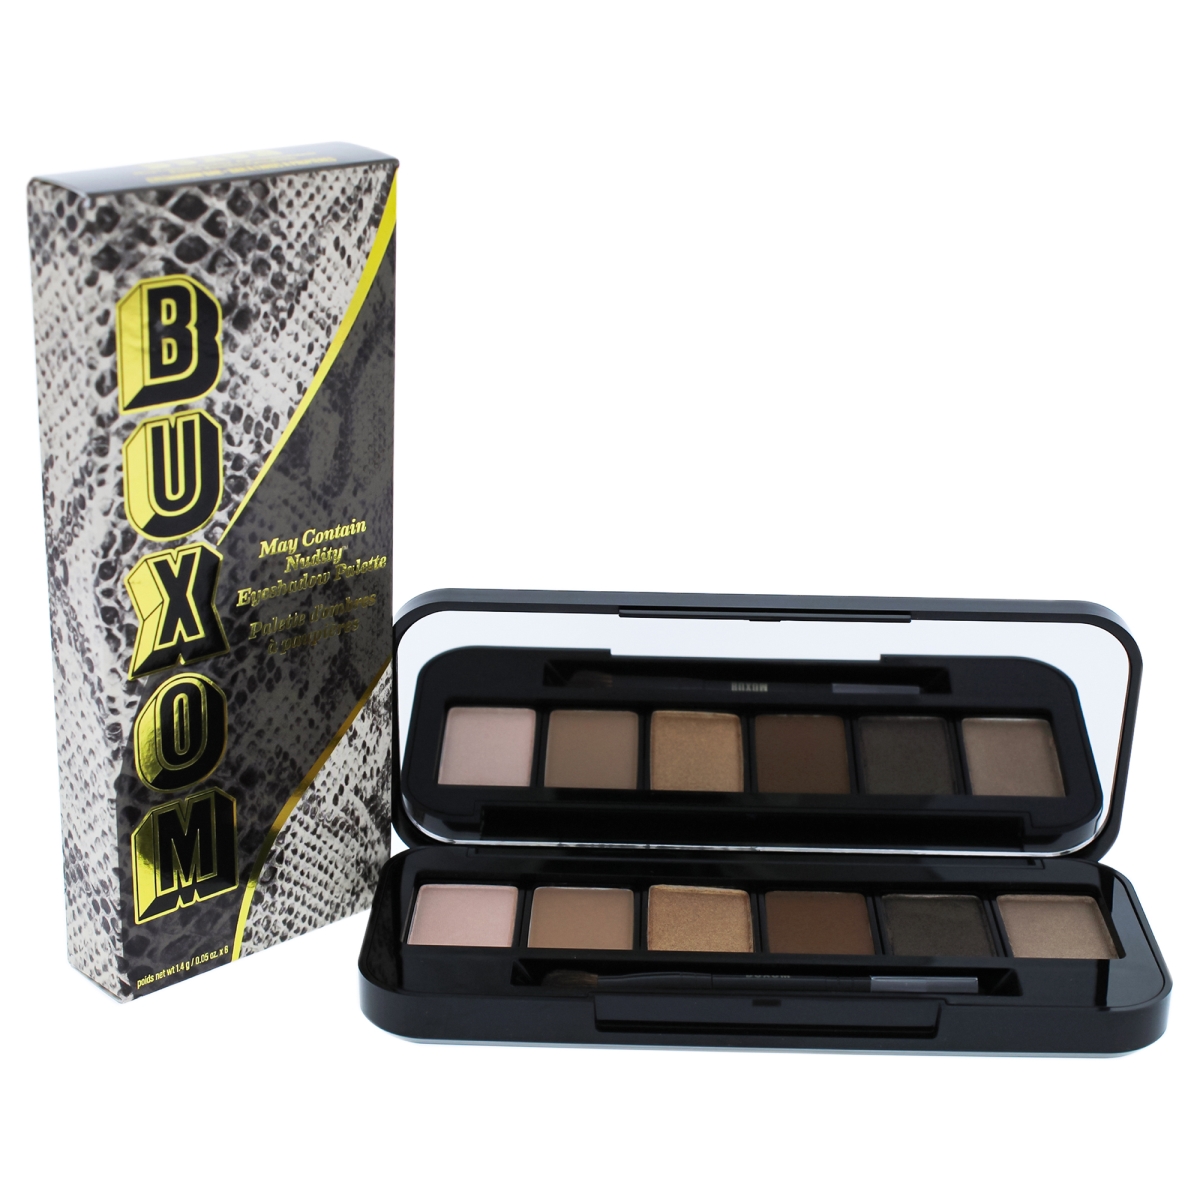 I0086723 May Contain Nudity Eyeshadow Palette For Women